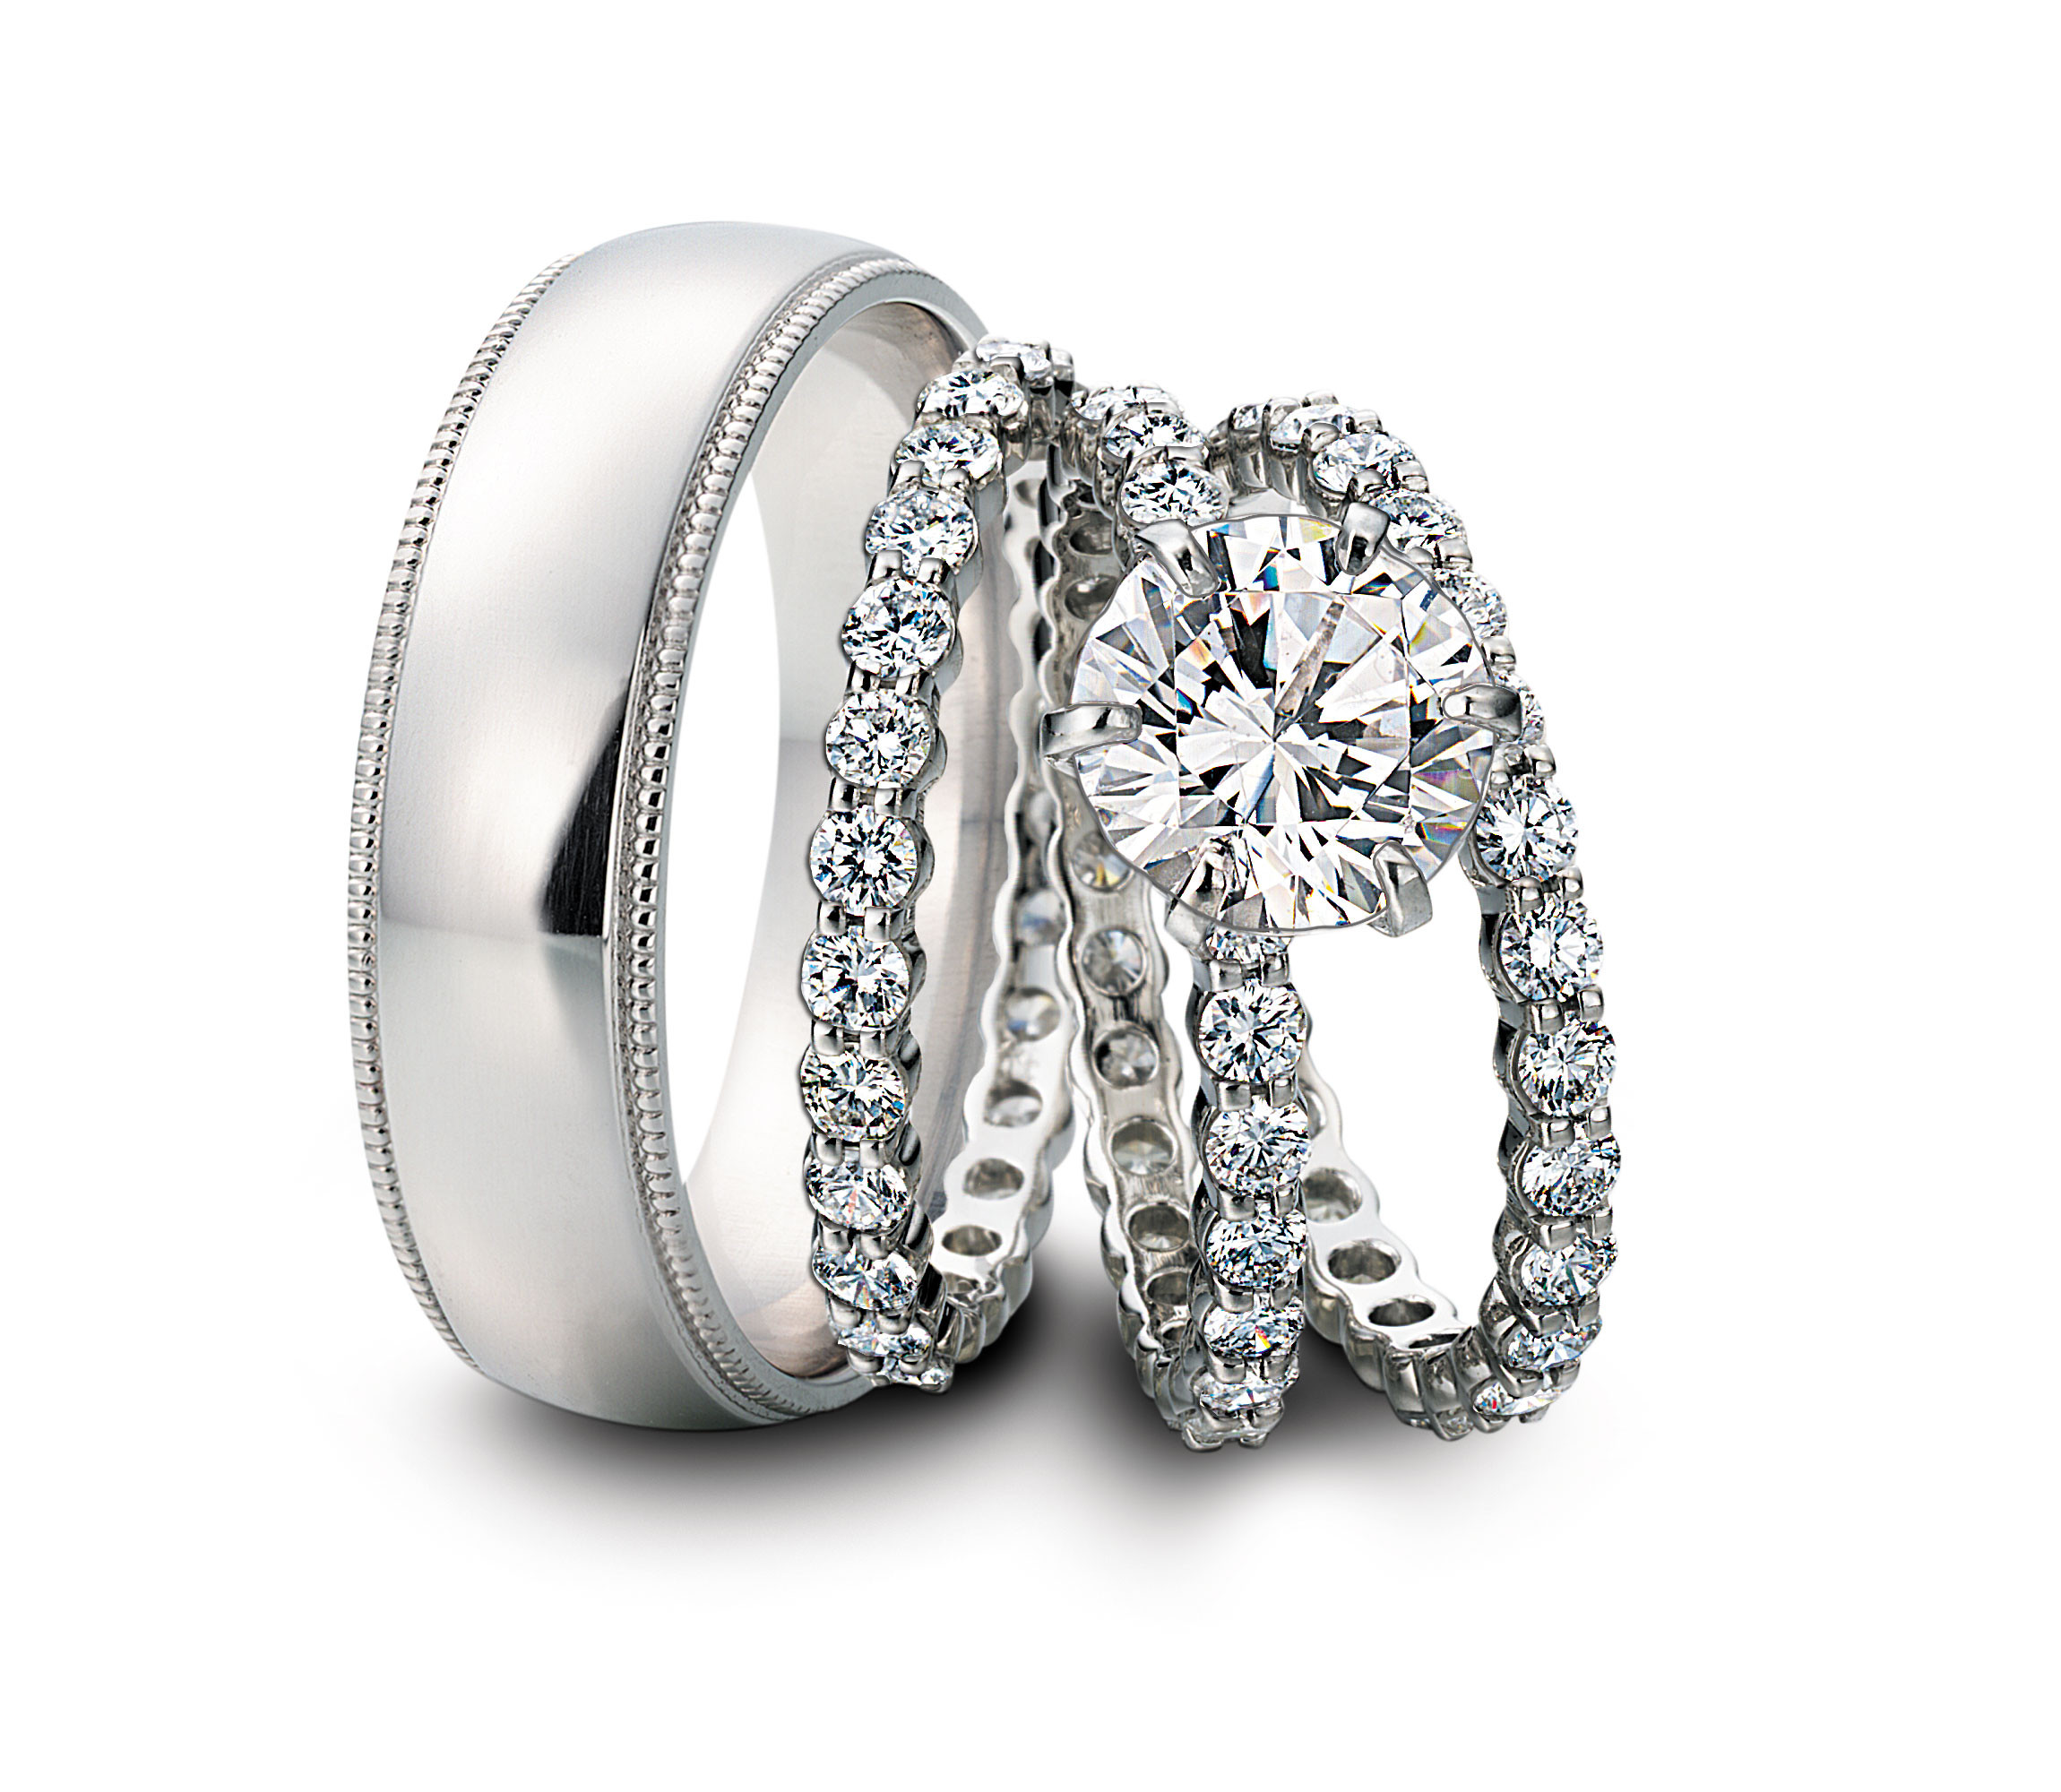 Matching Wedding Ring Sets His And Hers
 Should my wedding band be platinum or gold